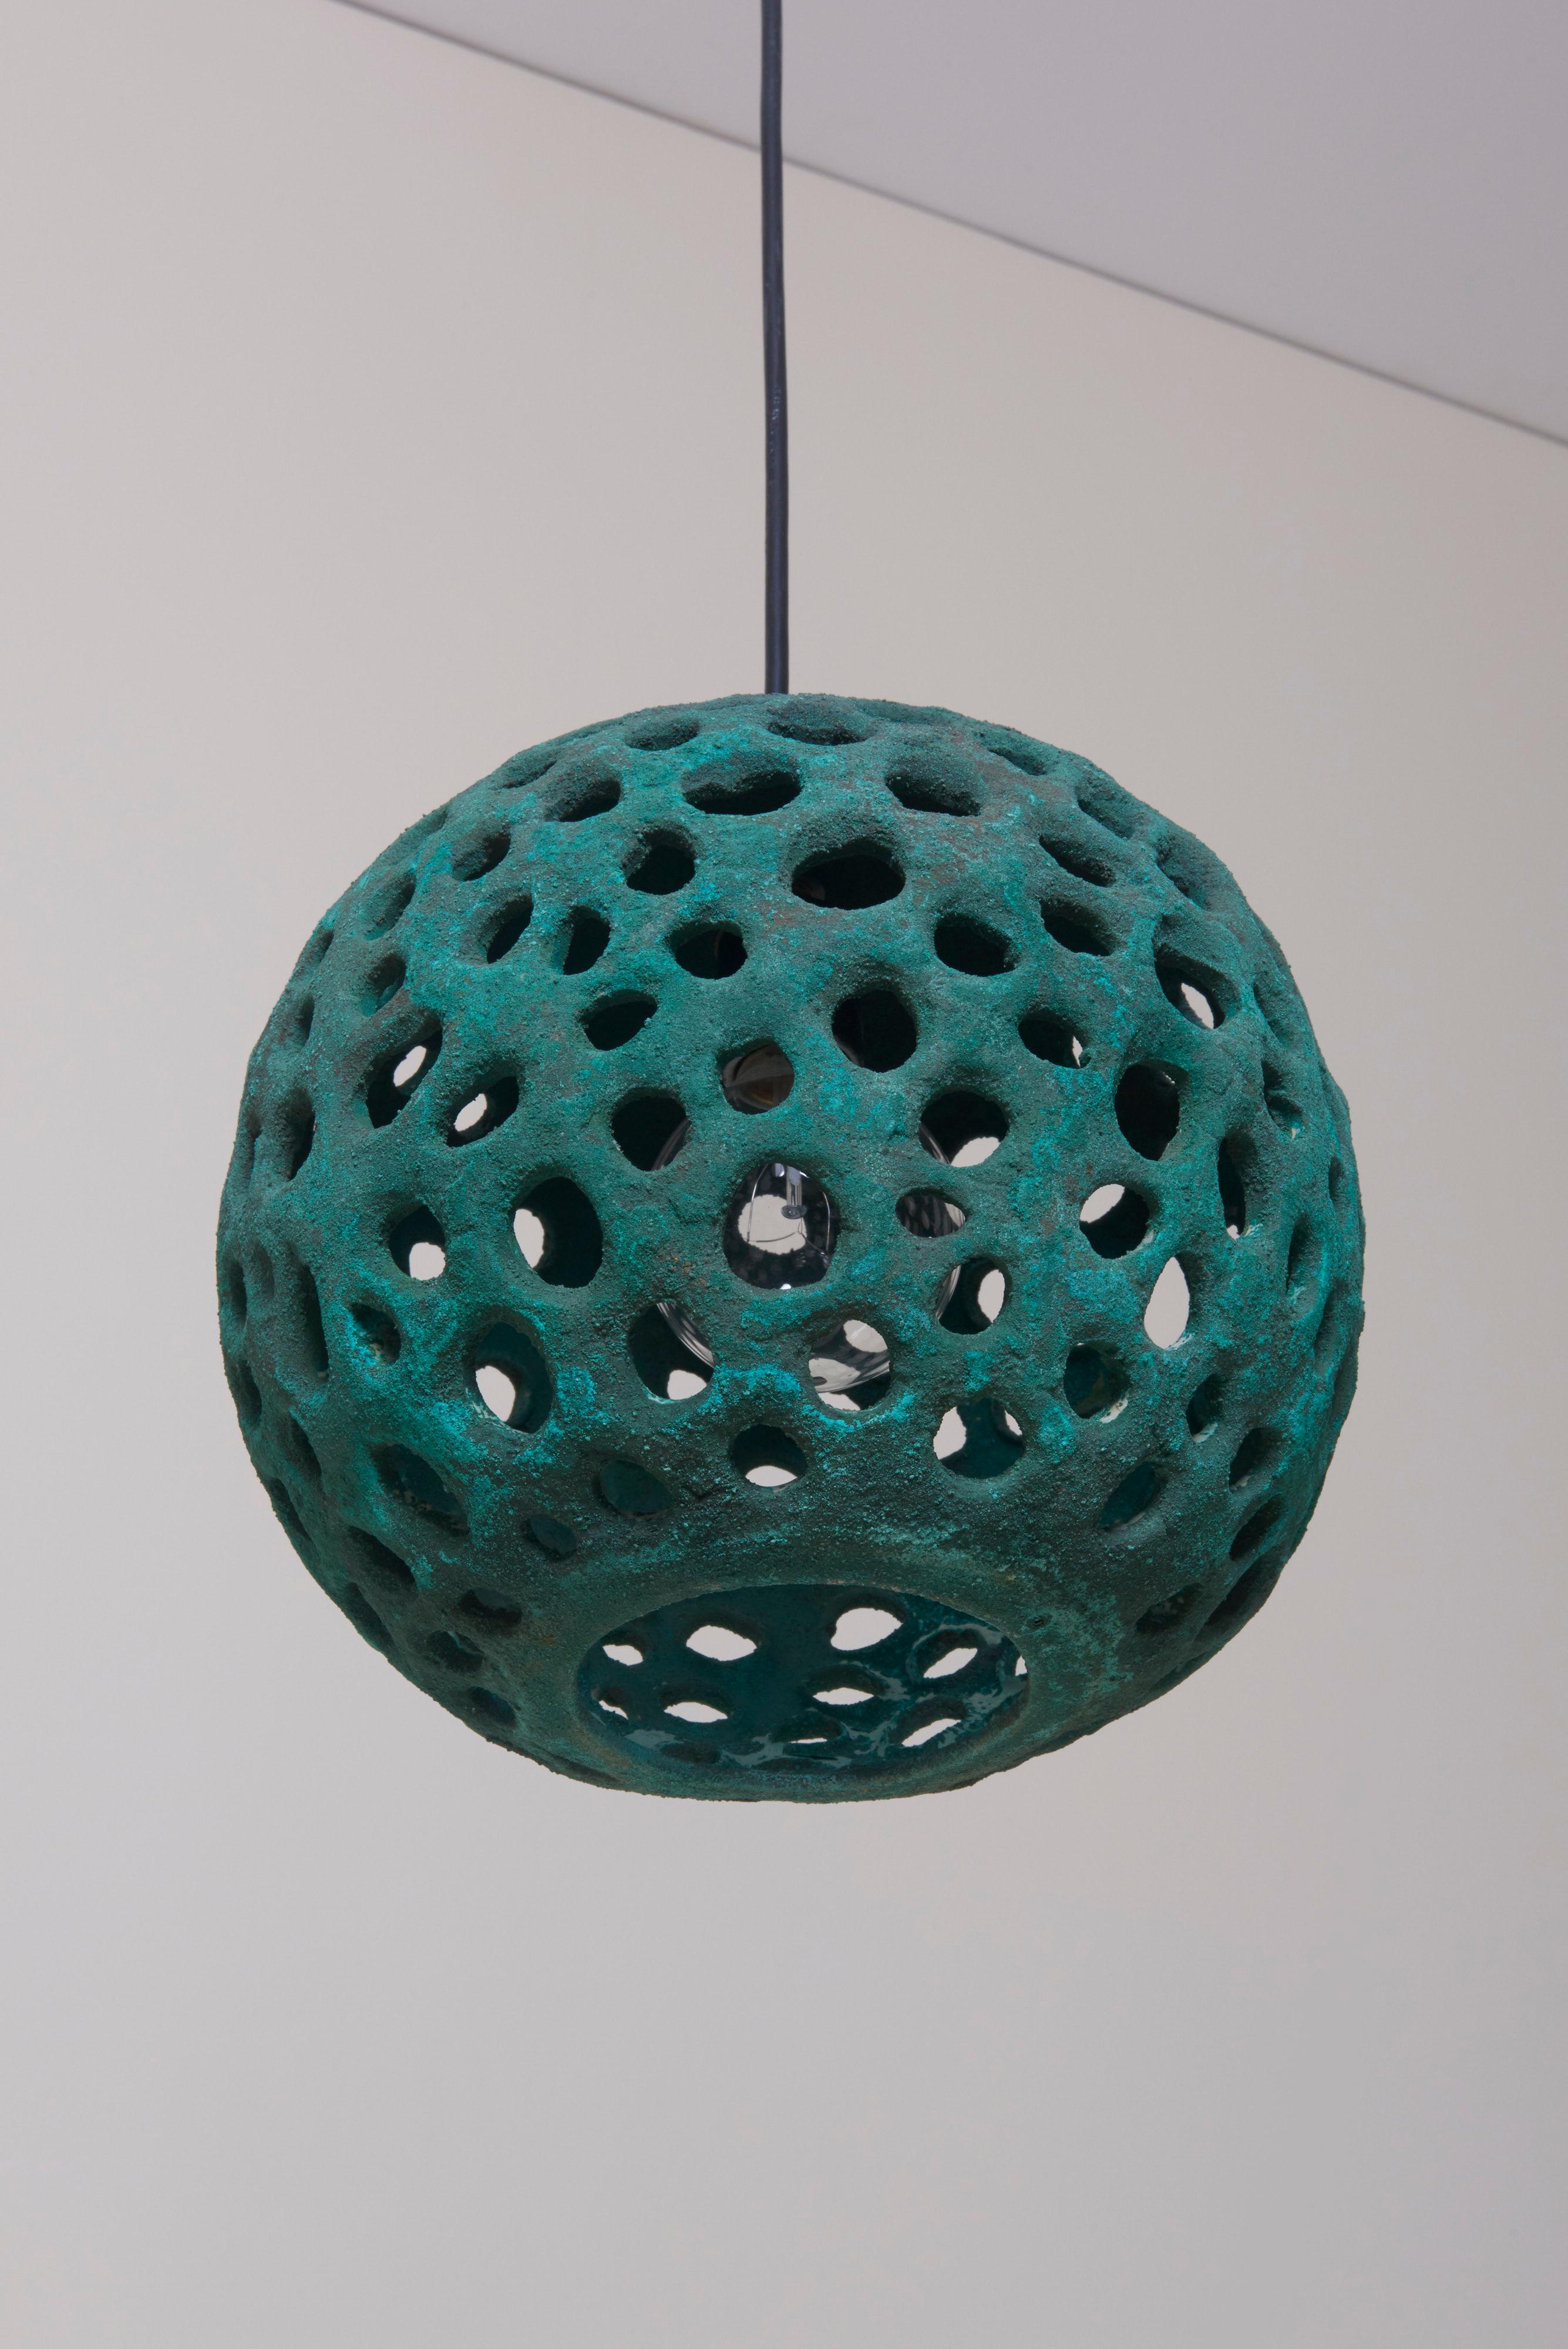 Excellent handmade Stan Bitters ceramic ball lamp in copper green. Warm light soaks through the different openings.
One model A / E27 bulb 40 watts.
To be on the safe side, the lamp should be checked locally by a specialist concerning local